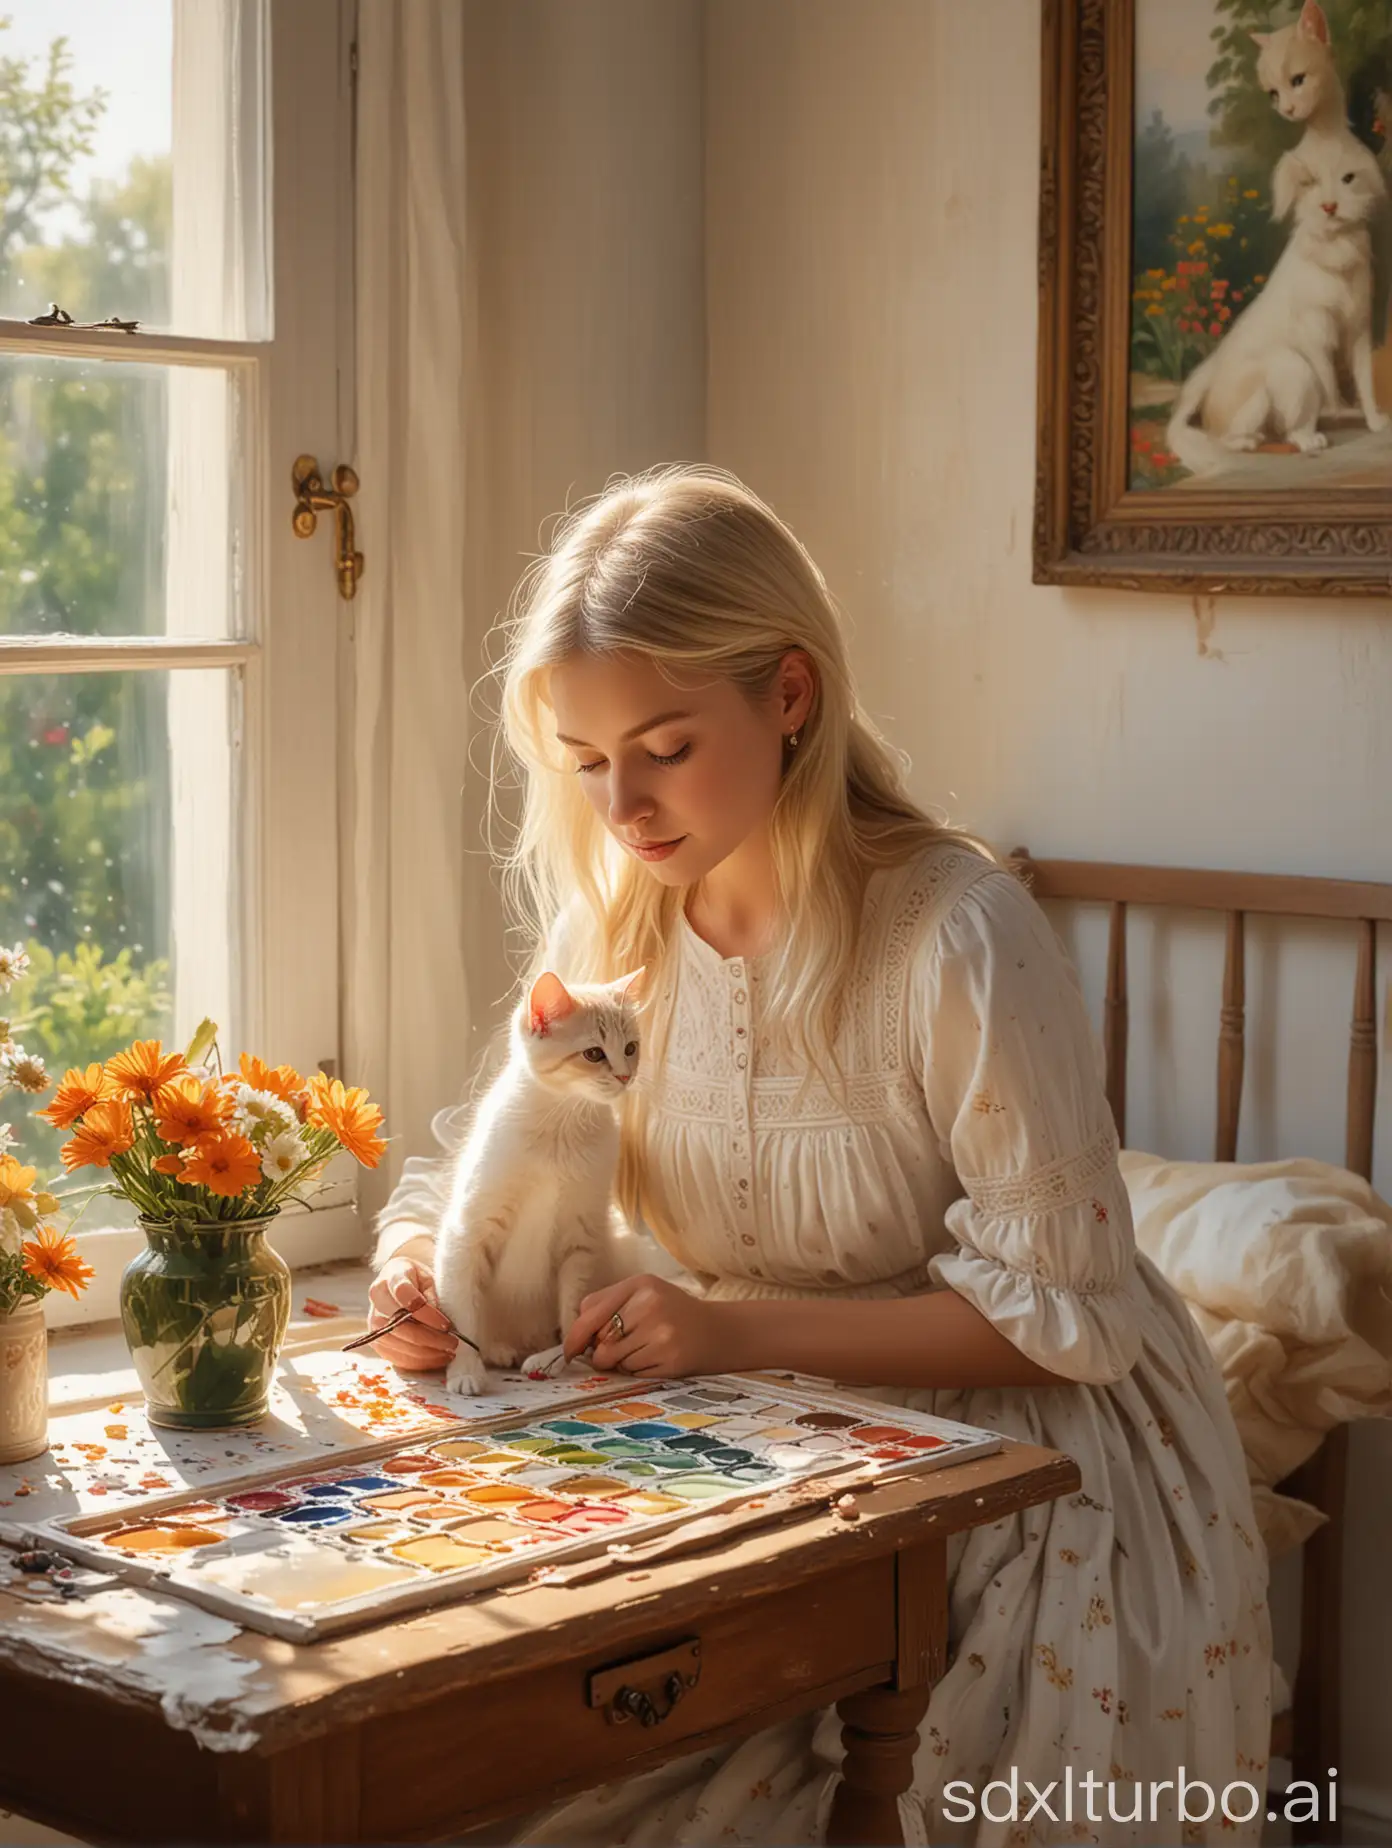 A (((thin blonde girl))) with intricate details and soft lines, lost in the art of painting a portrait, joined by a (curious kitten) that sniffs at the palette and brushes, both enjoying a tranquil atmosphere in a cozy (bedroom), framed by a (sunny window) that illuminates a (softly glowing outdoor garden) in the background